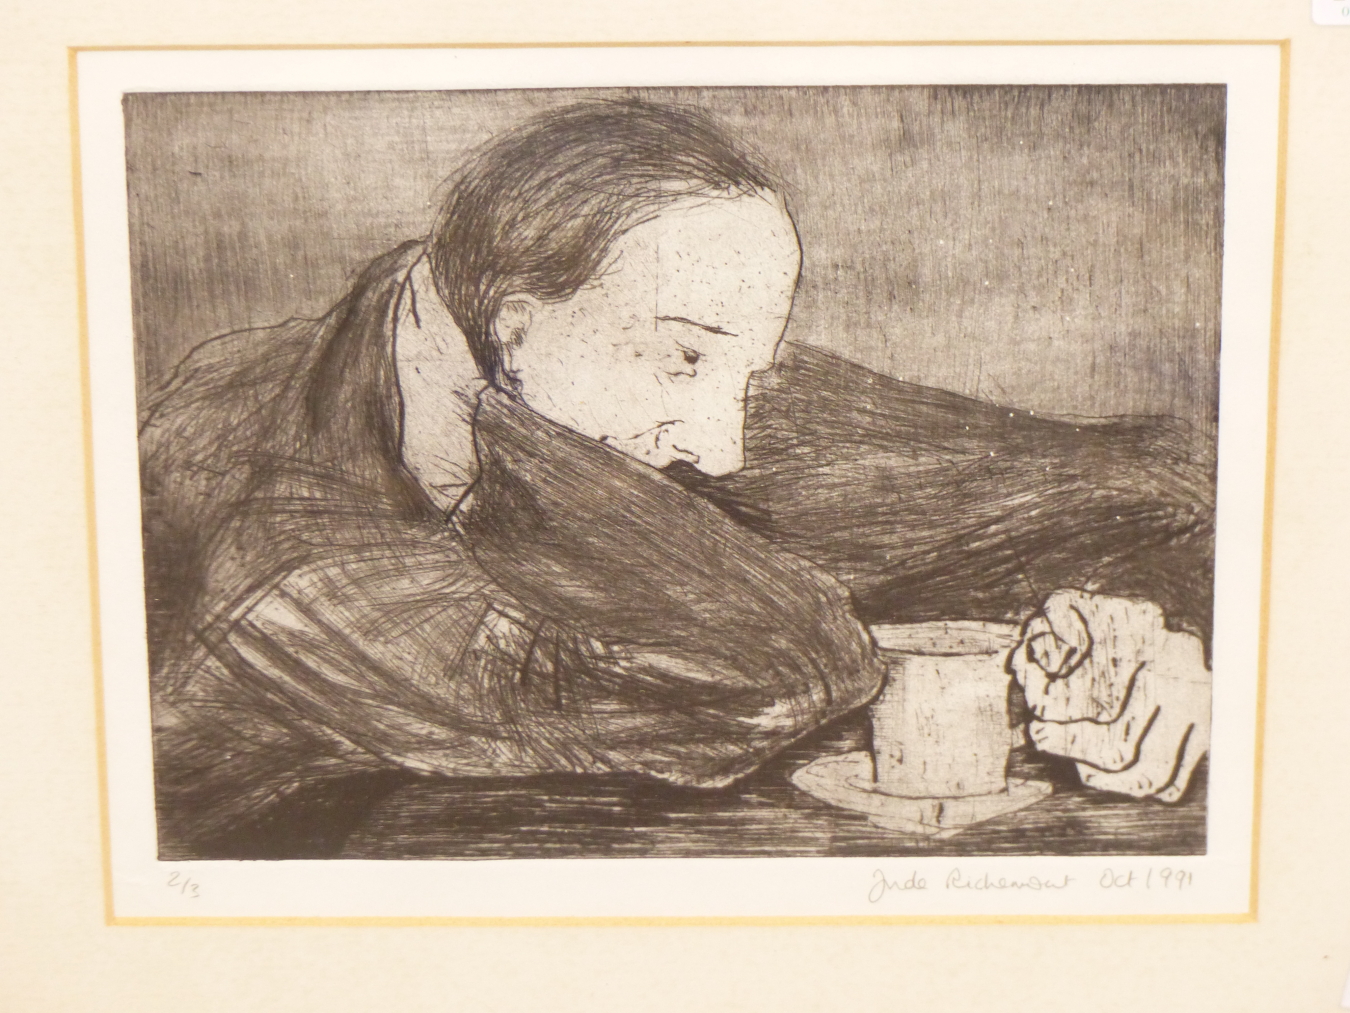 JUDE RICHEMONT, 20THC. UNKNOWN PERSON HUNCHED OVER A CUP OF TEA. NUMBERED EDITION 2/3, DATED OCT